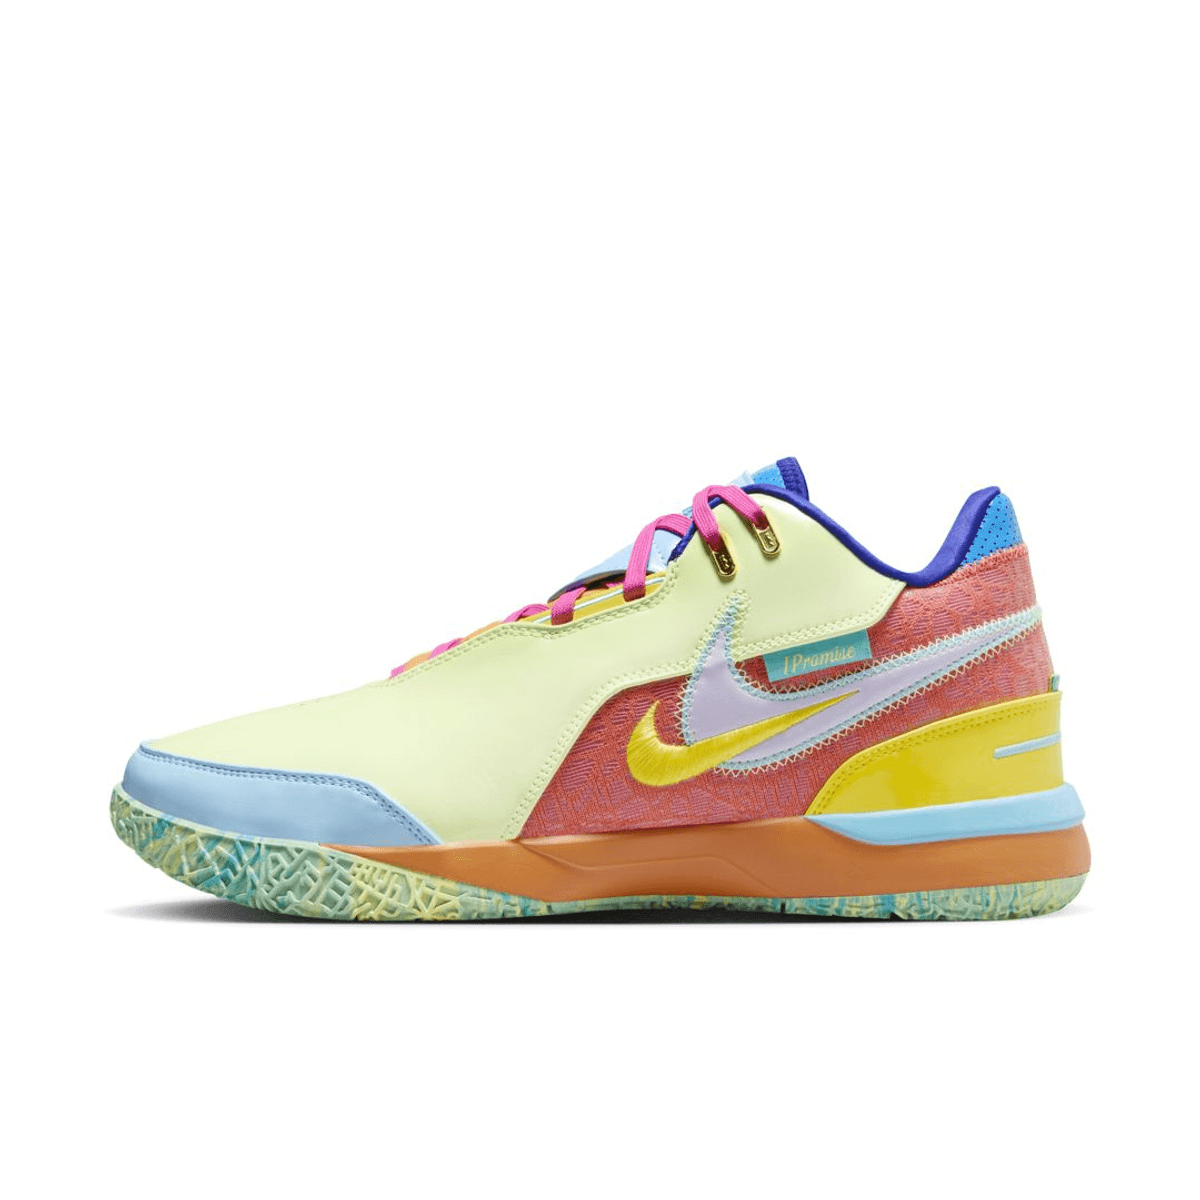 The Nike LeBron NXXT Gen Ampd “Multi-Color” Releases February 2024